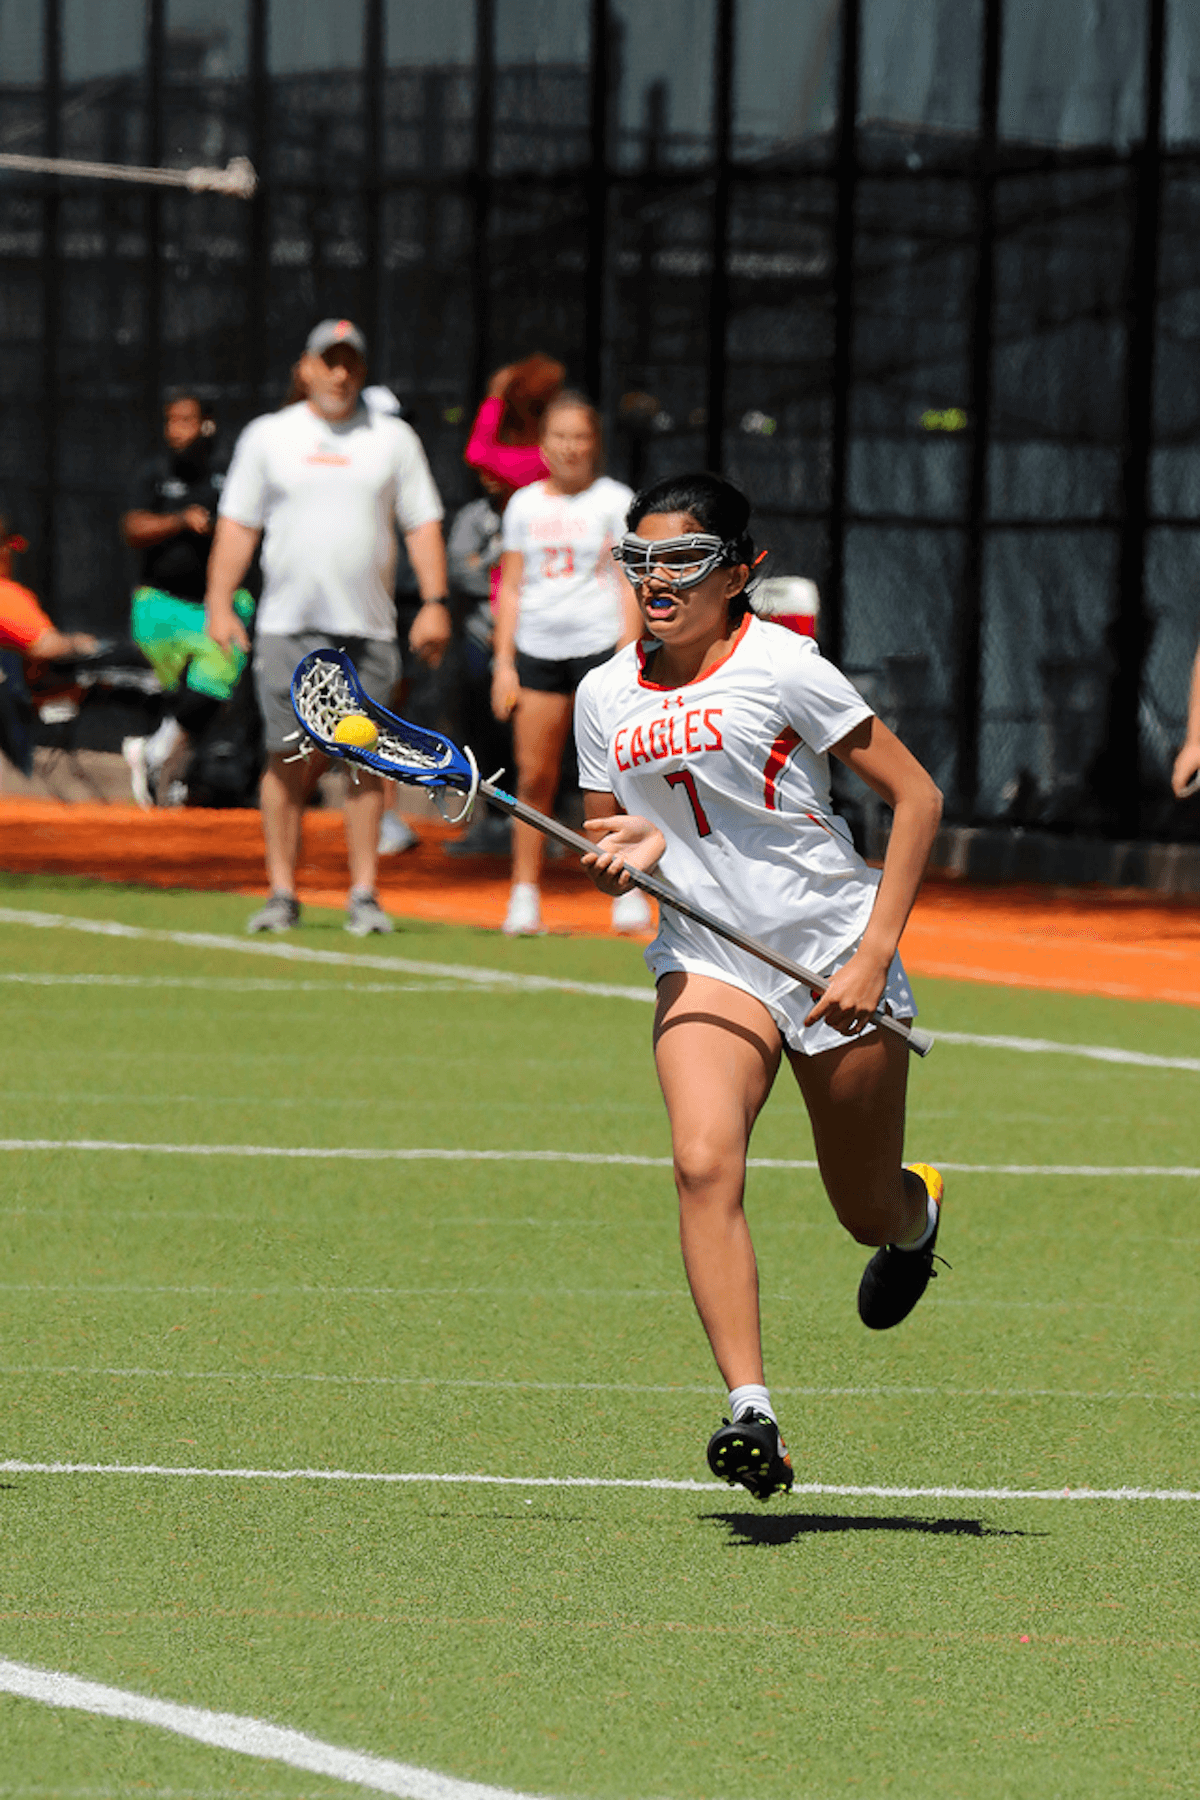 An Ethical Culture Fieldston lacrosse player participates at Spring Fling.